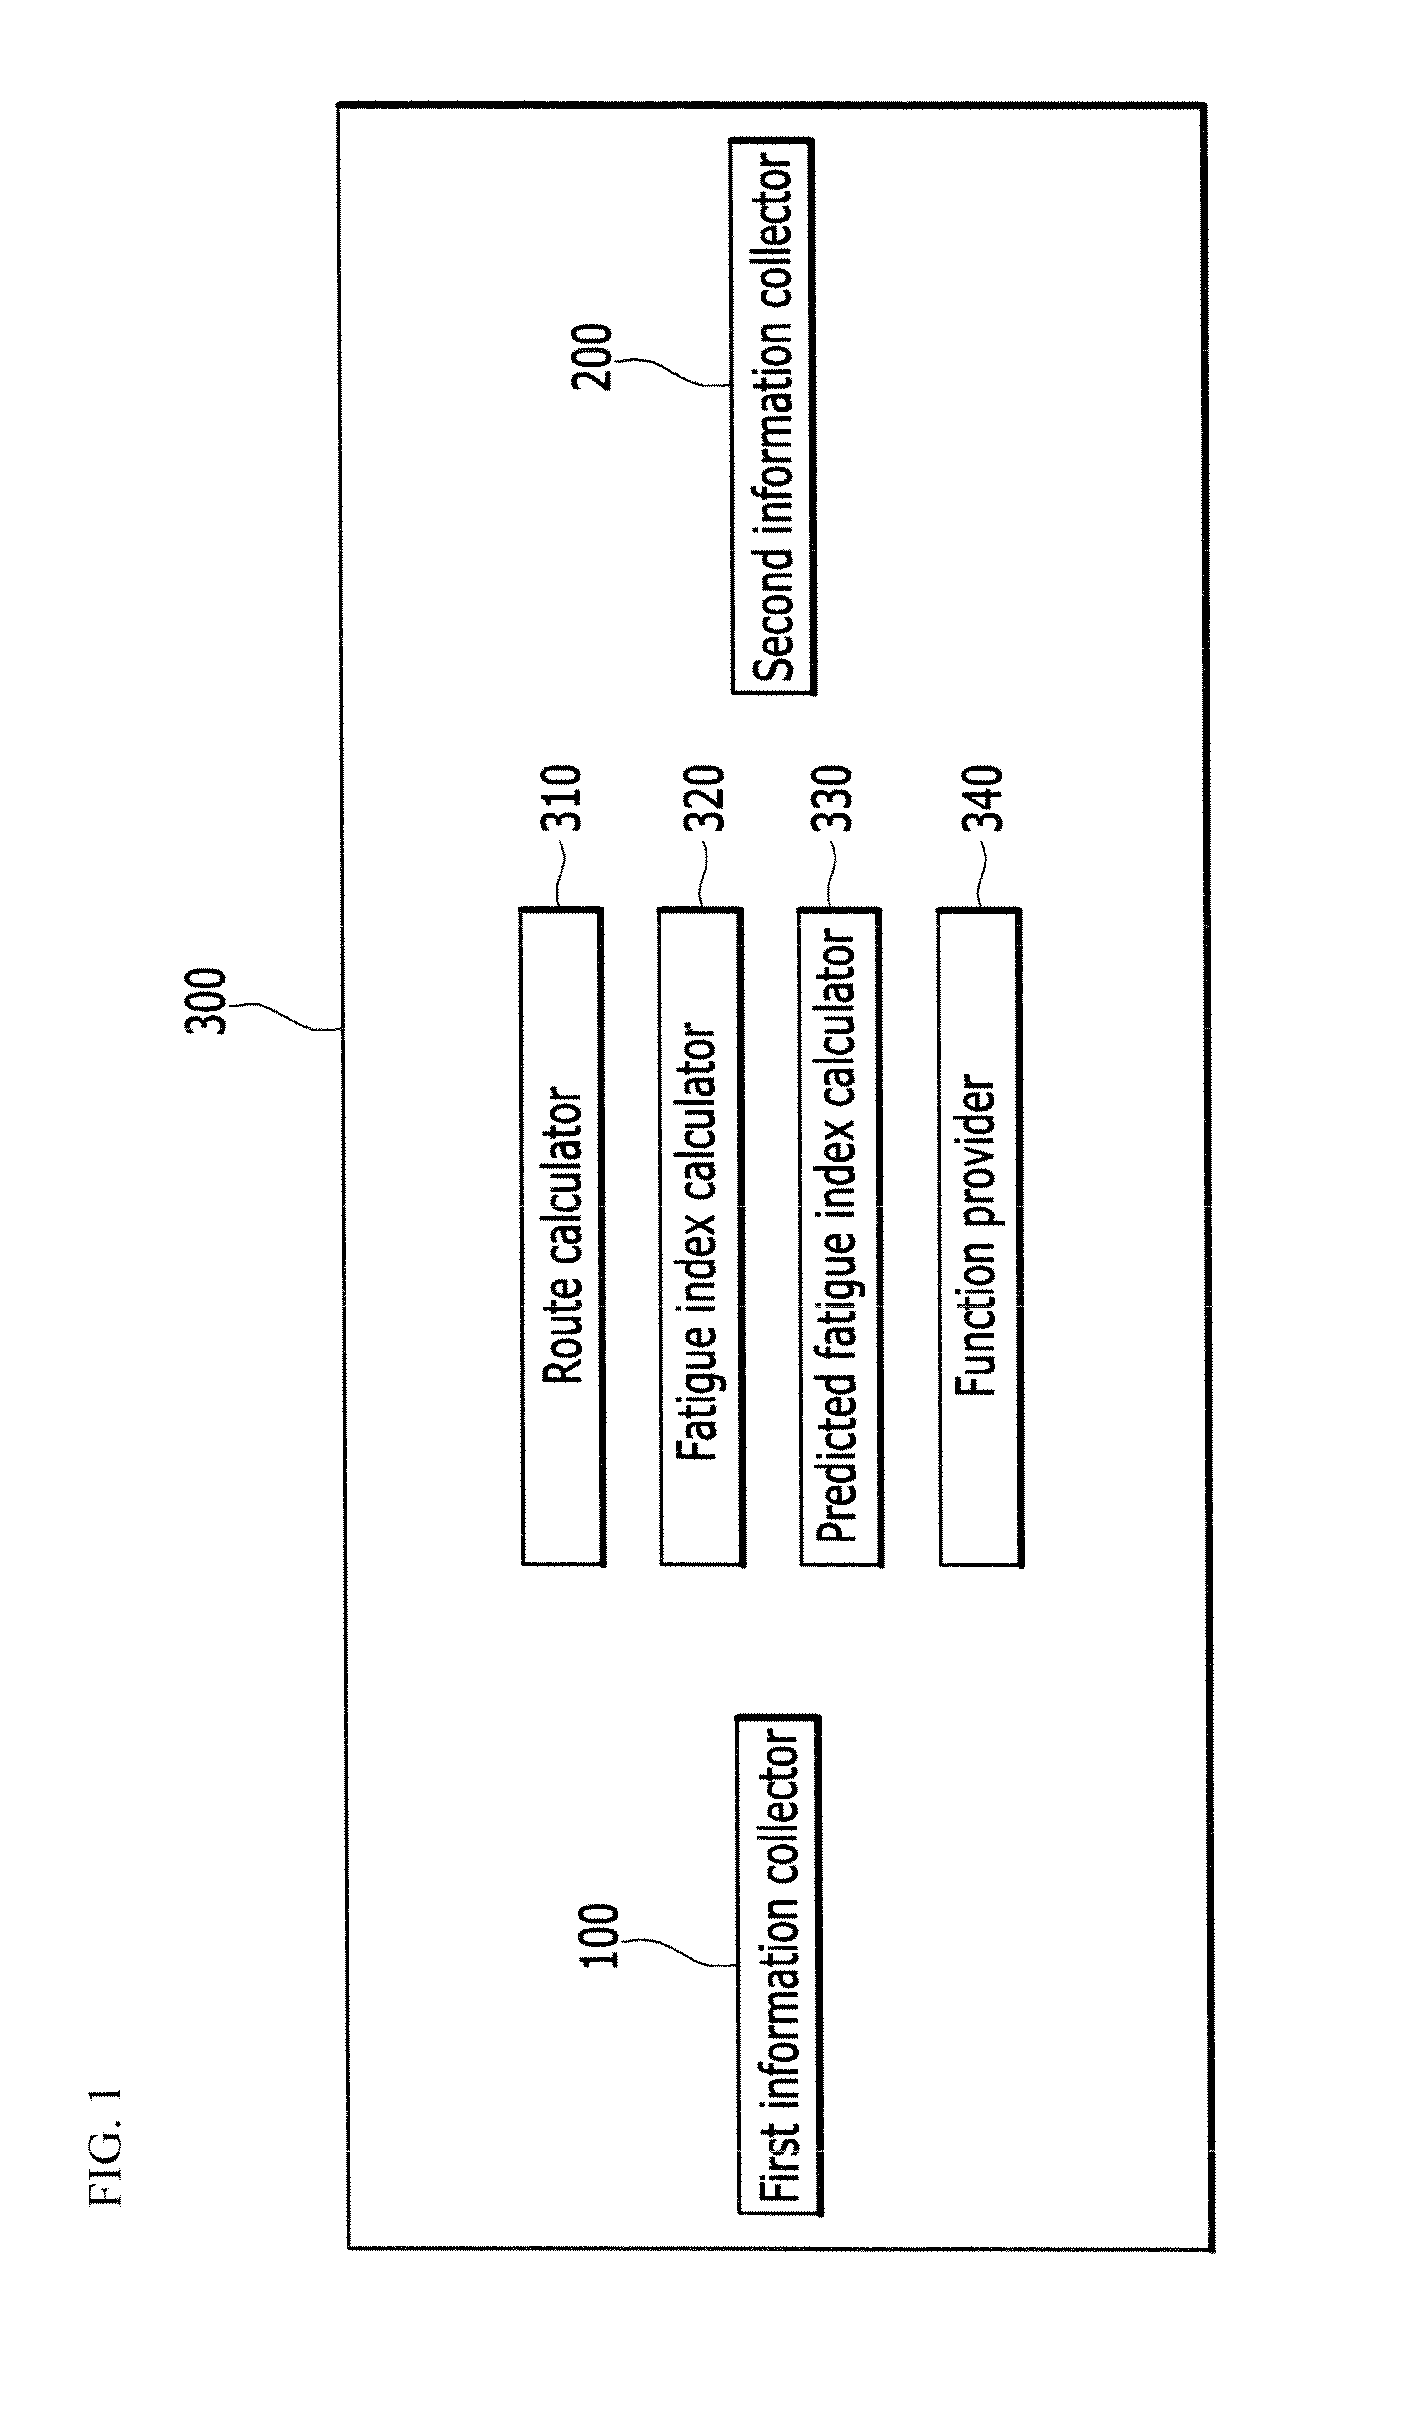 Apparatus and method for controlling driving of vehicle based on driver's fatigue